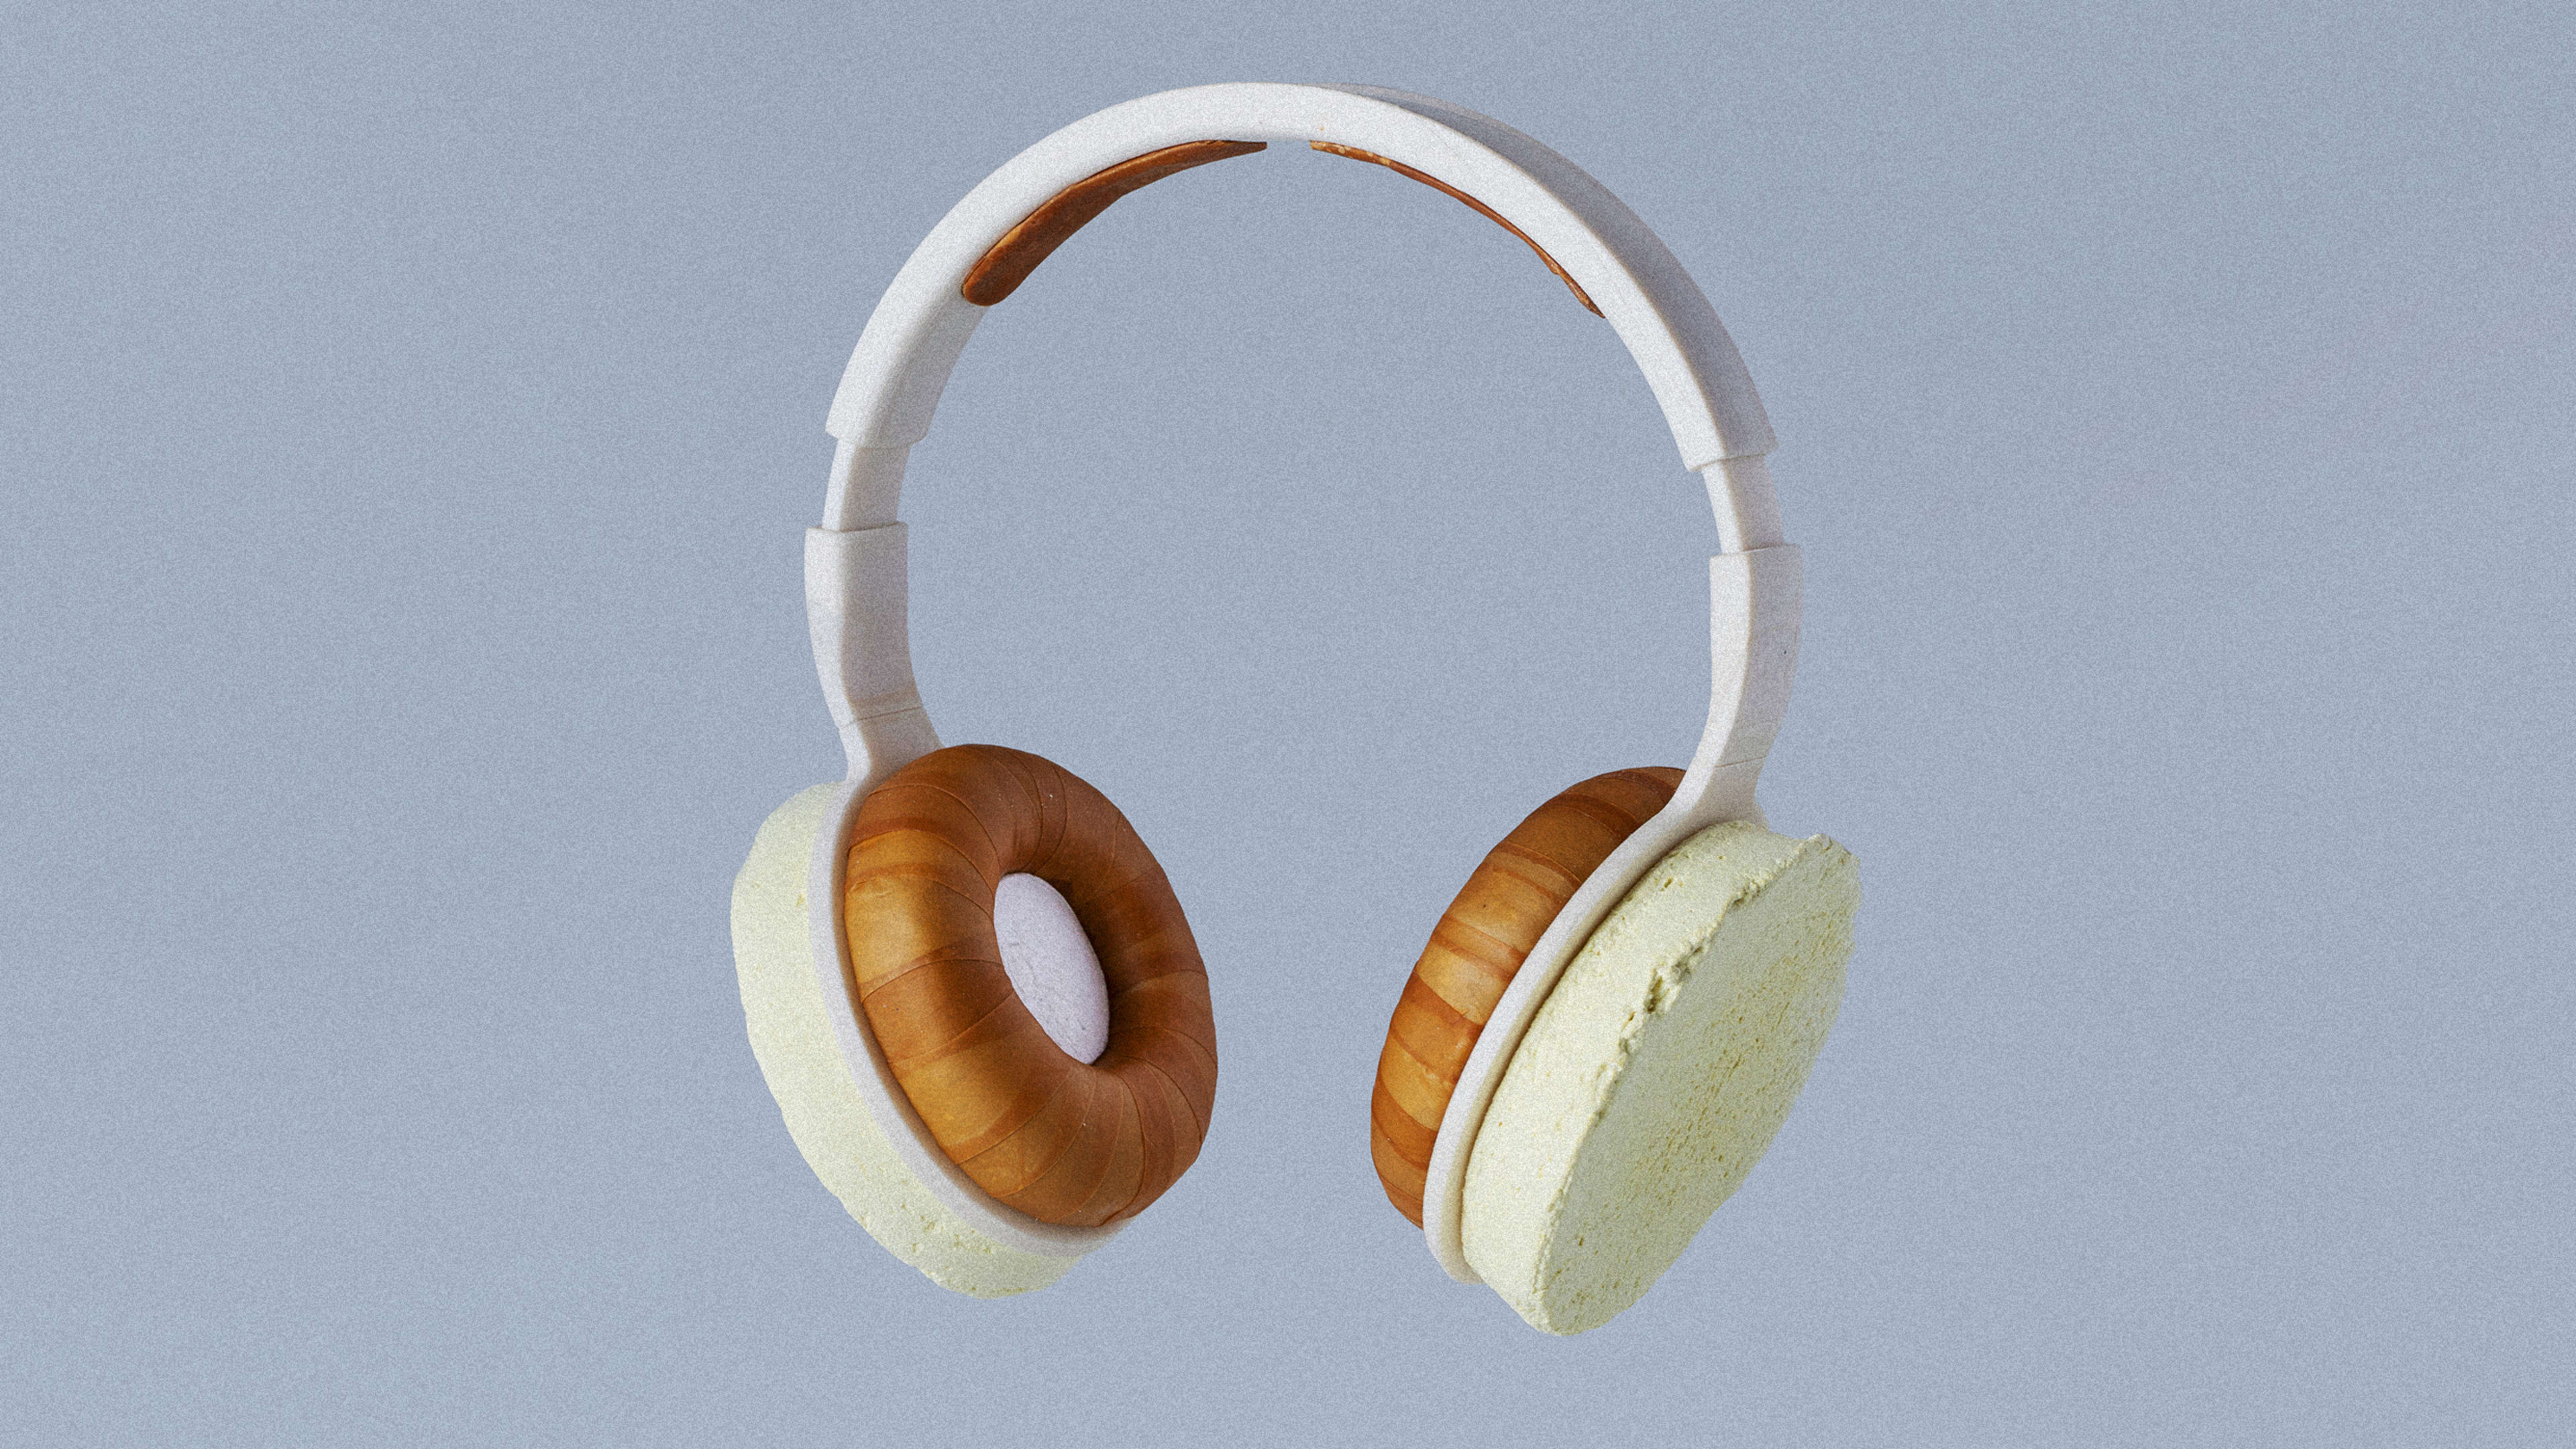 The world’s most beautiful headphones are here, and they’re made of fungus